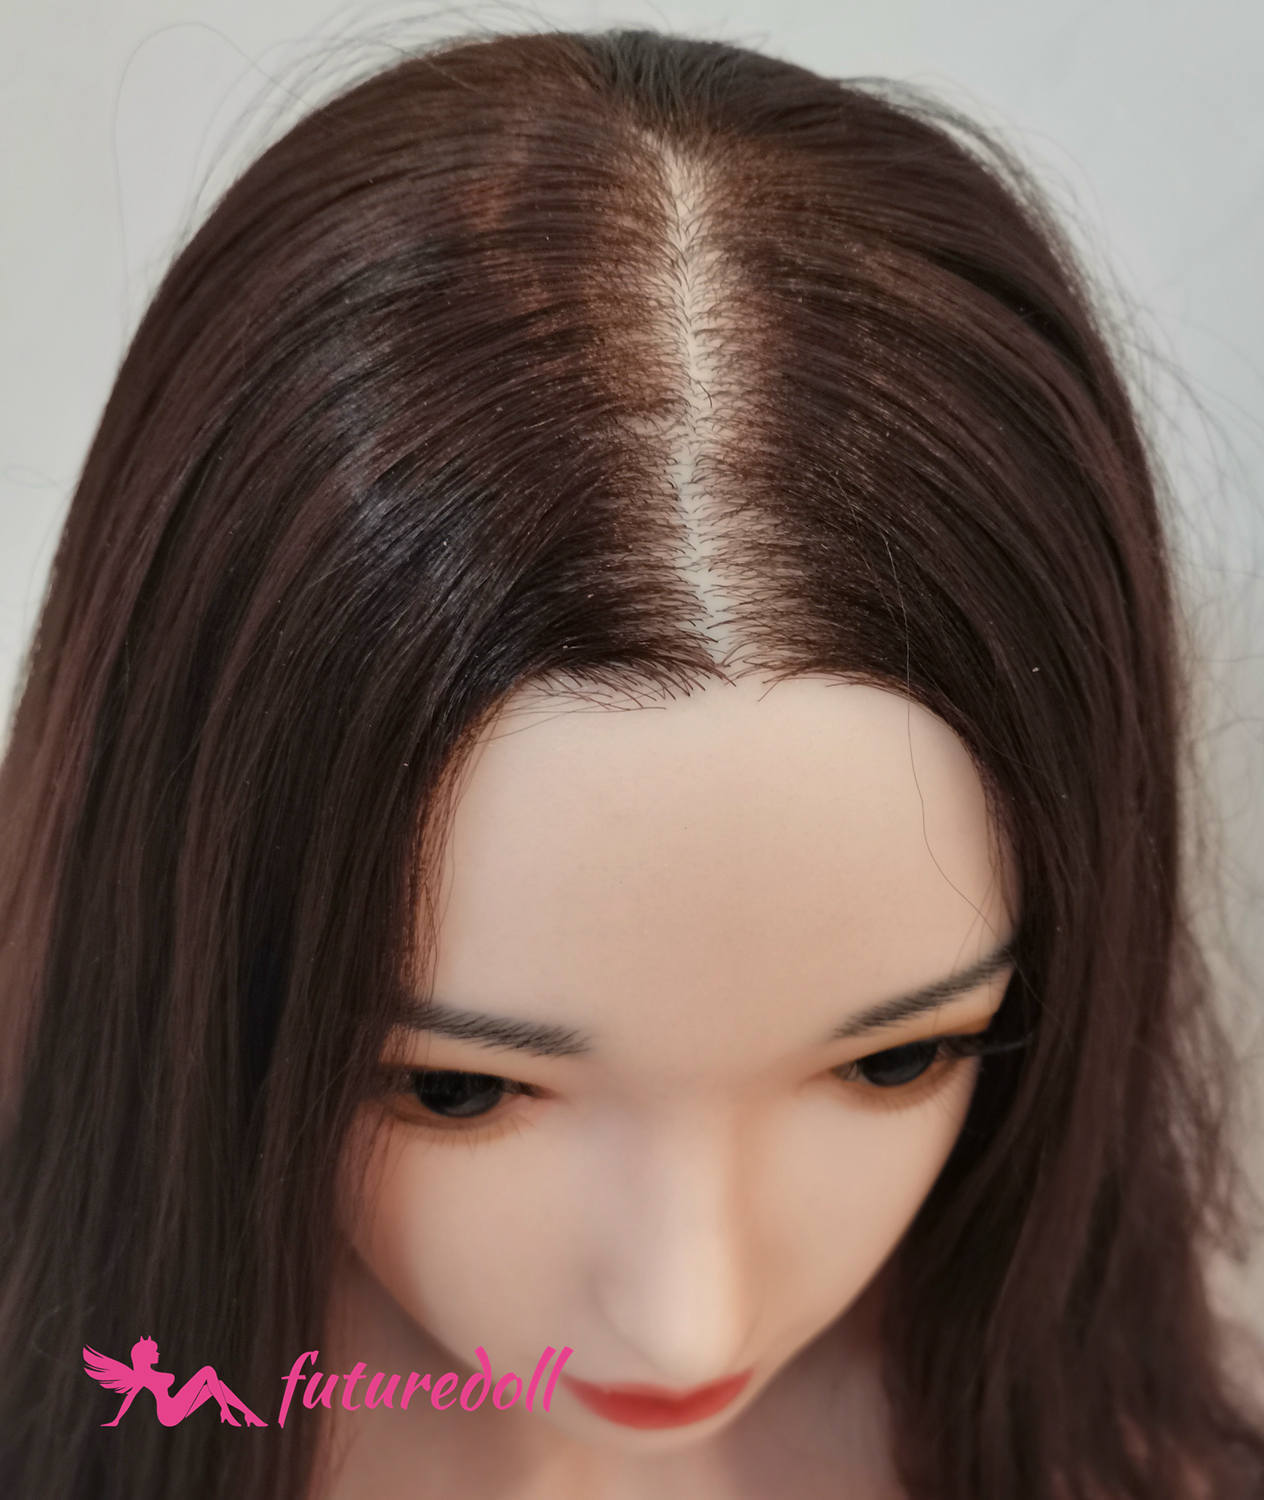 Hyper Realistic Dolls and Male Sex Toys Future Doll 163cm Perfect Sex Doll Silicone Adult Dolls for Men Hyper Realistic Dolls and Male Masturbation Toys 163cm Perfect Sex Doll